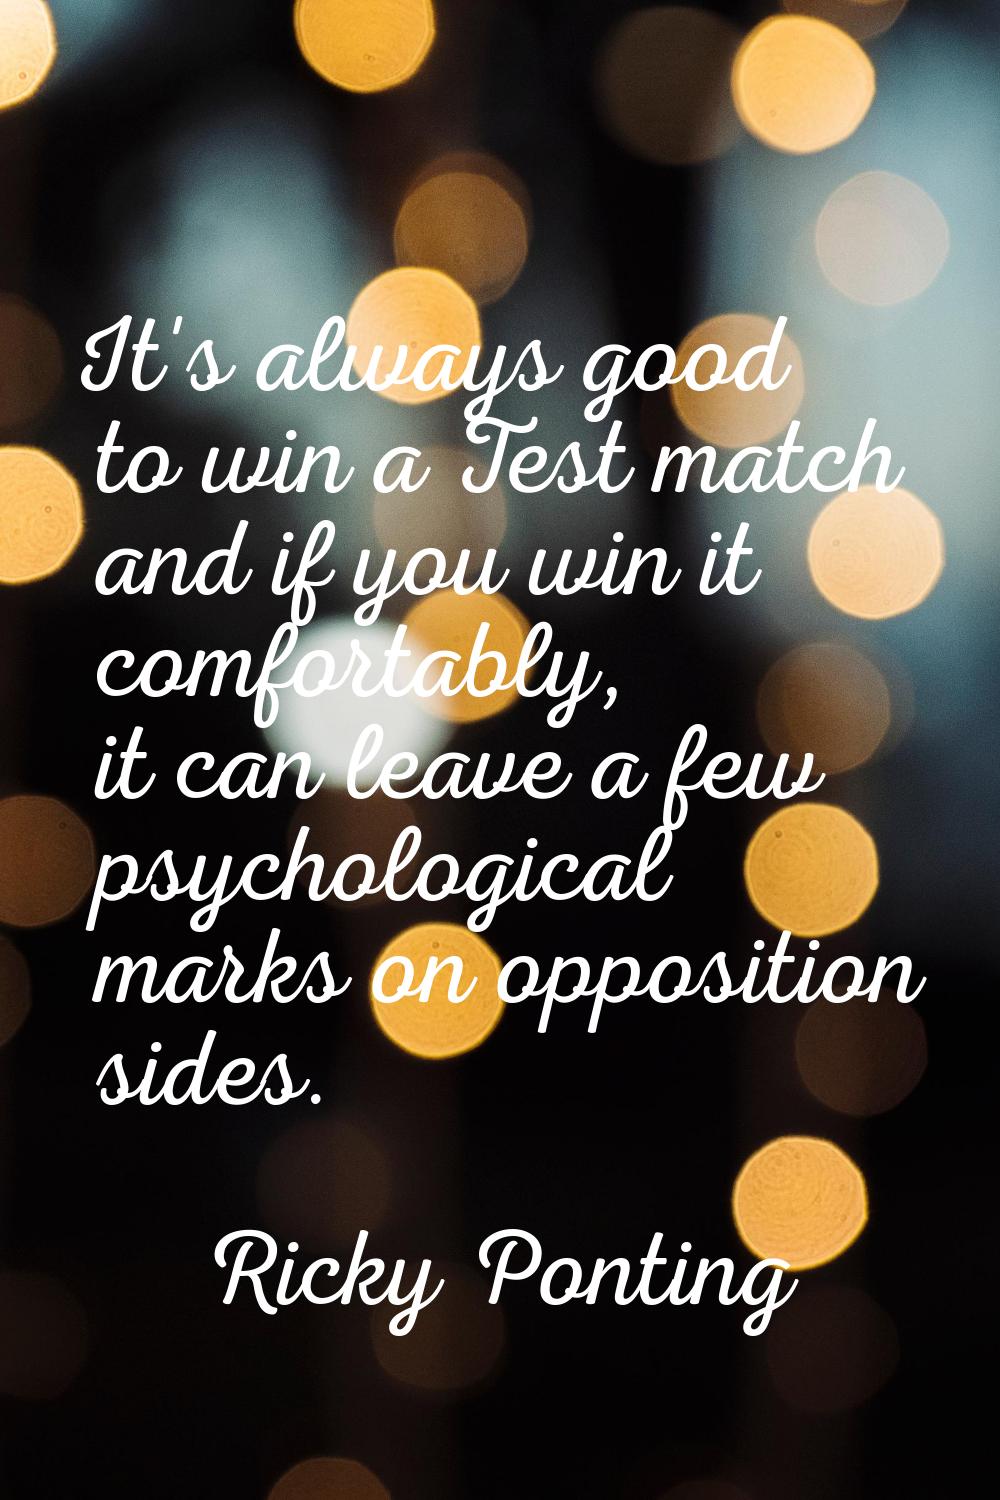 It's always good to win a Test match and if you win it comfortably, it can leave a few psychologica